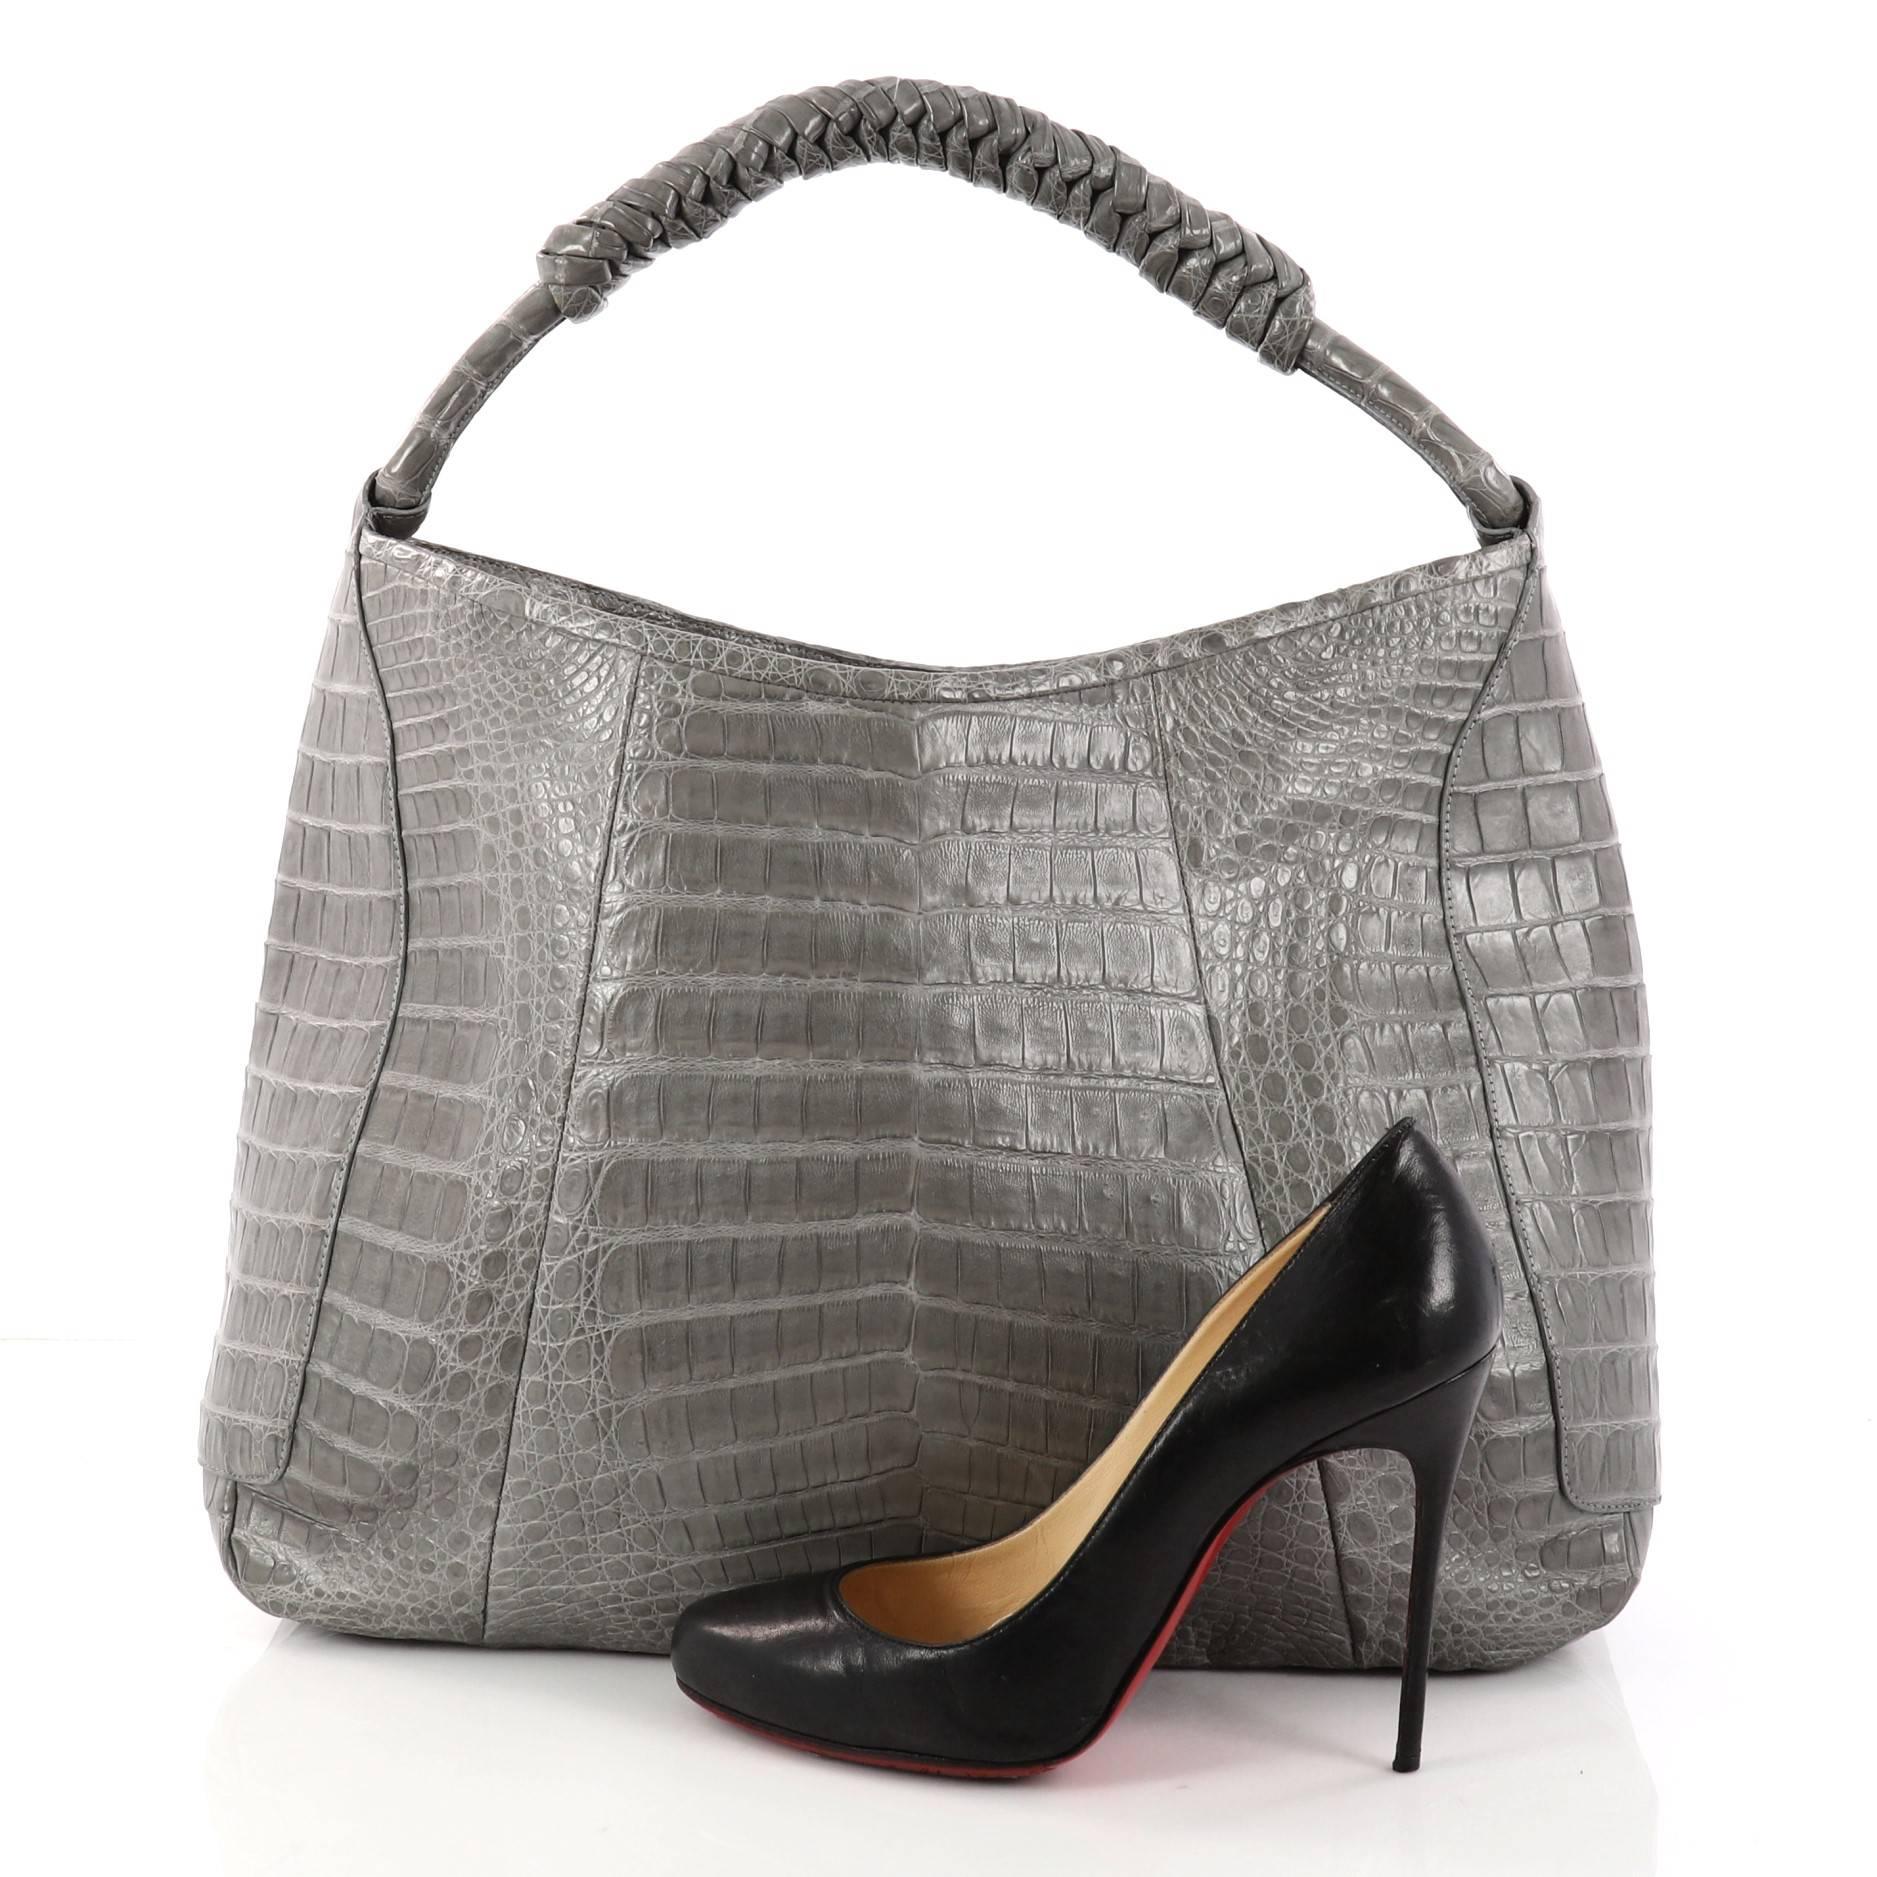 This authentic Nancy Gonzalez Braided Handle Hobo Crocodile Medium is a luxurious bag perfect for the modern fashionista. Crafted from genuine grey crocodile skin, this bag features a braided shoulder strap and gold-tone hardware accents. It opens